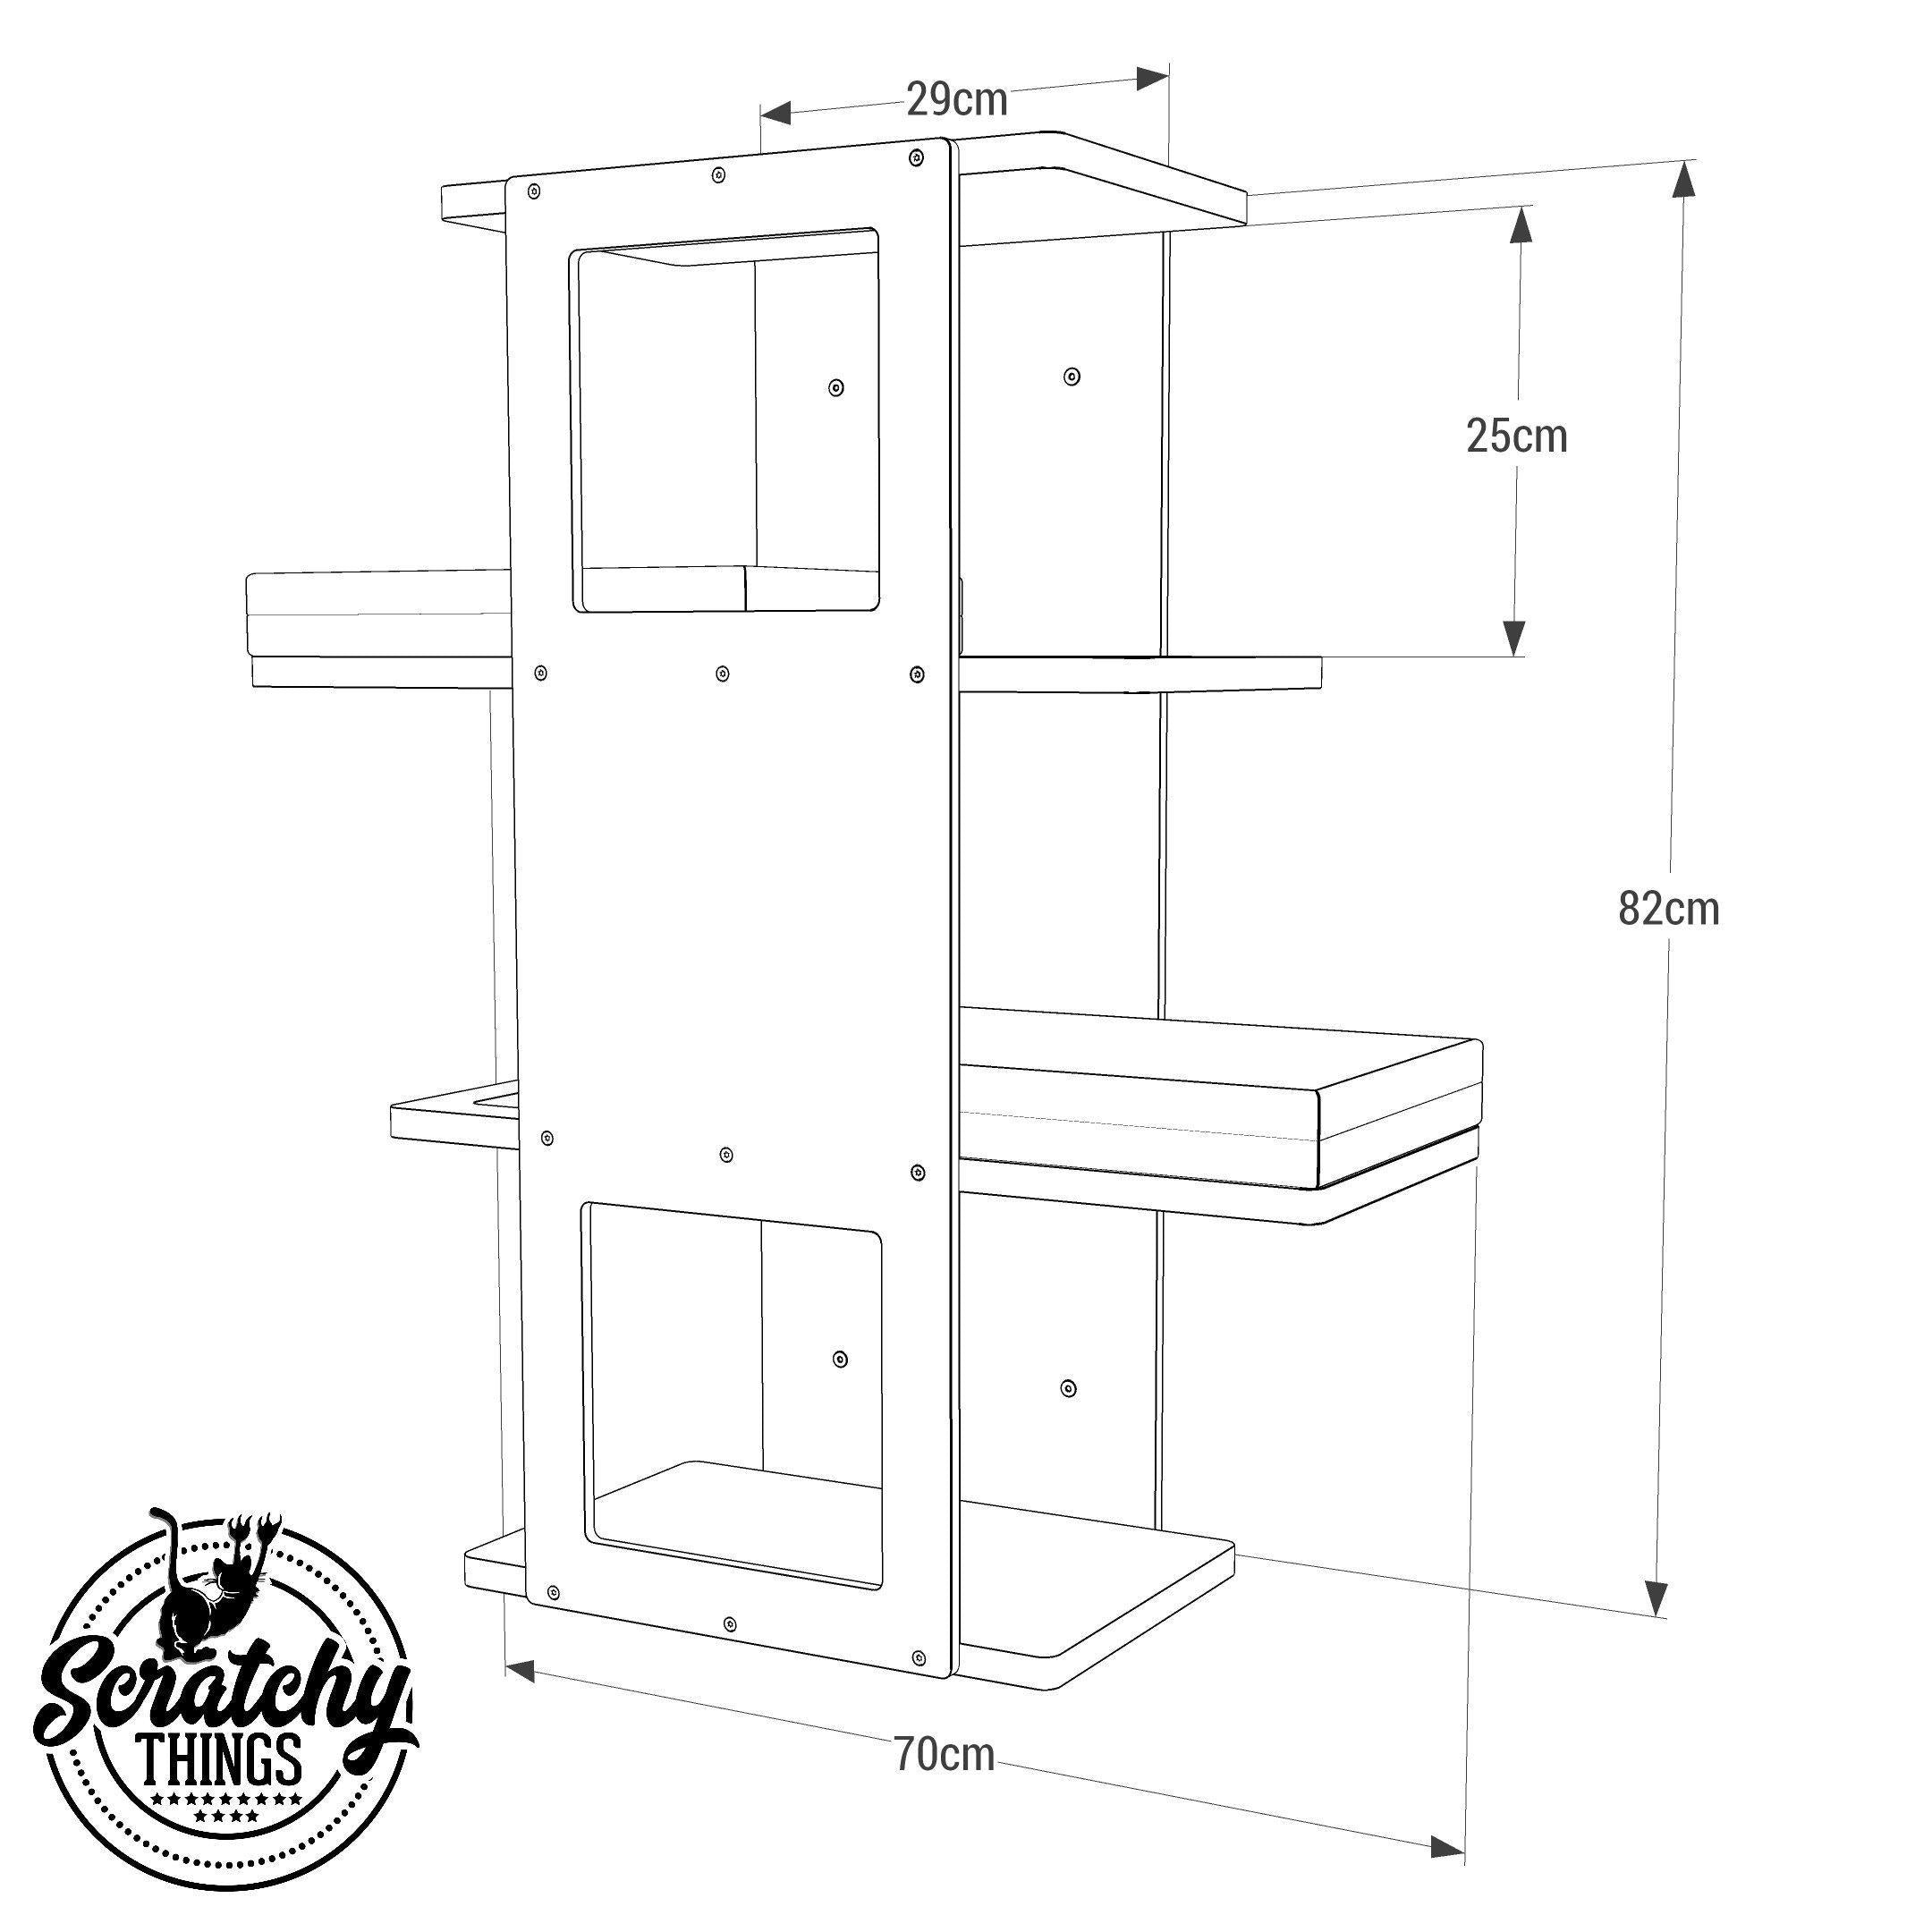 Catio Outdoor Cat Wall Shelf Bed Perch - Catio Stacker - multilevel outdoor shelf - Scratchy Things Premium Pet Furniture